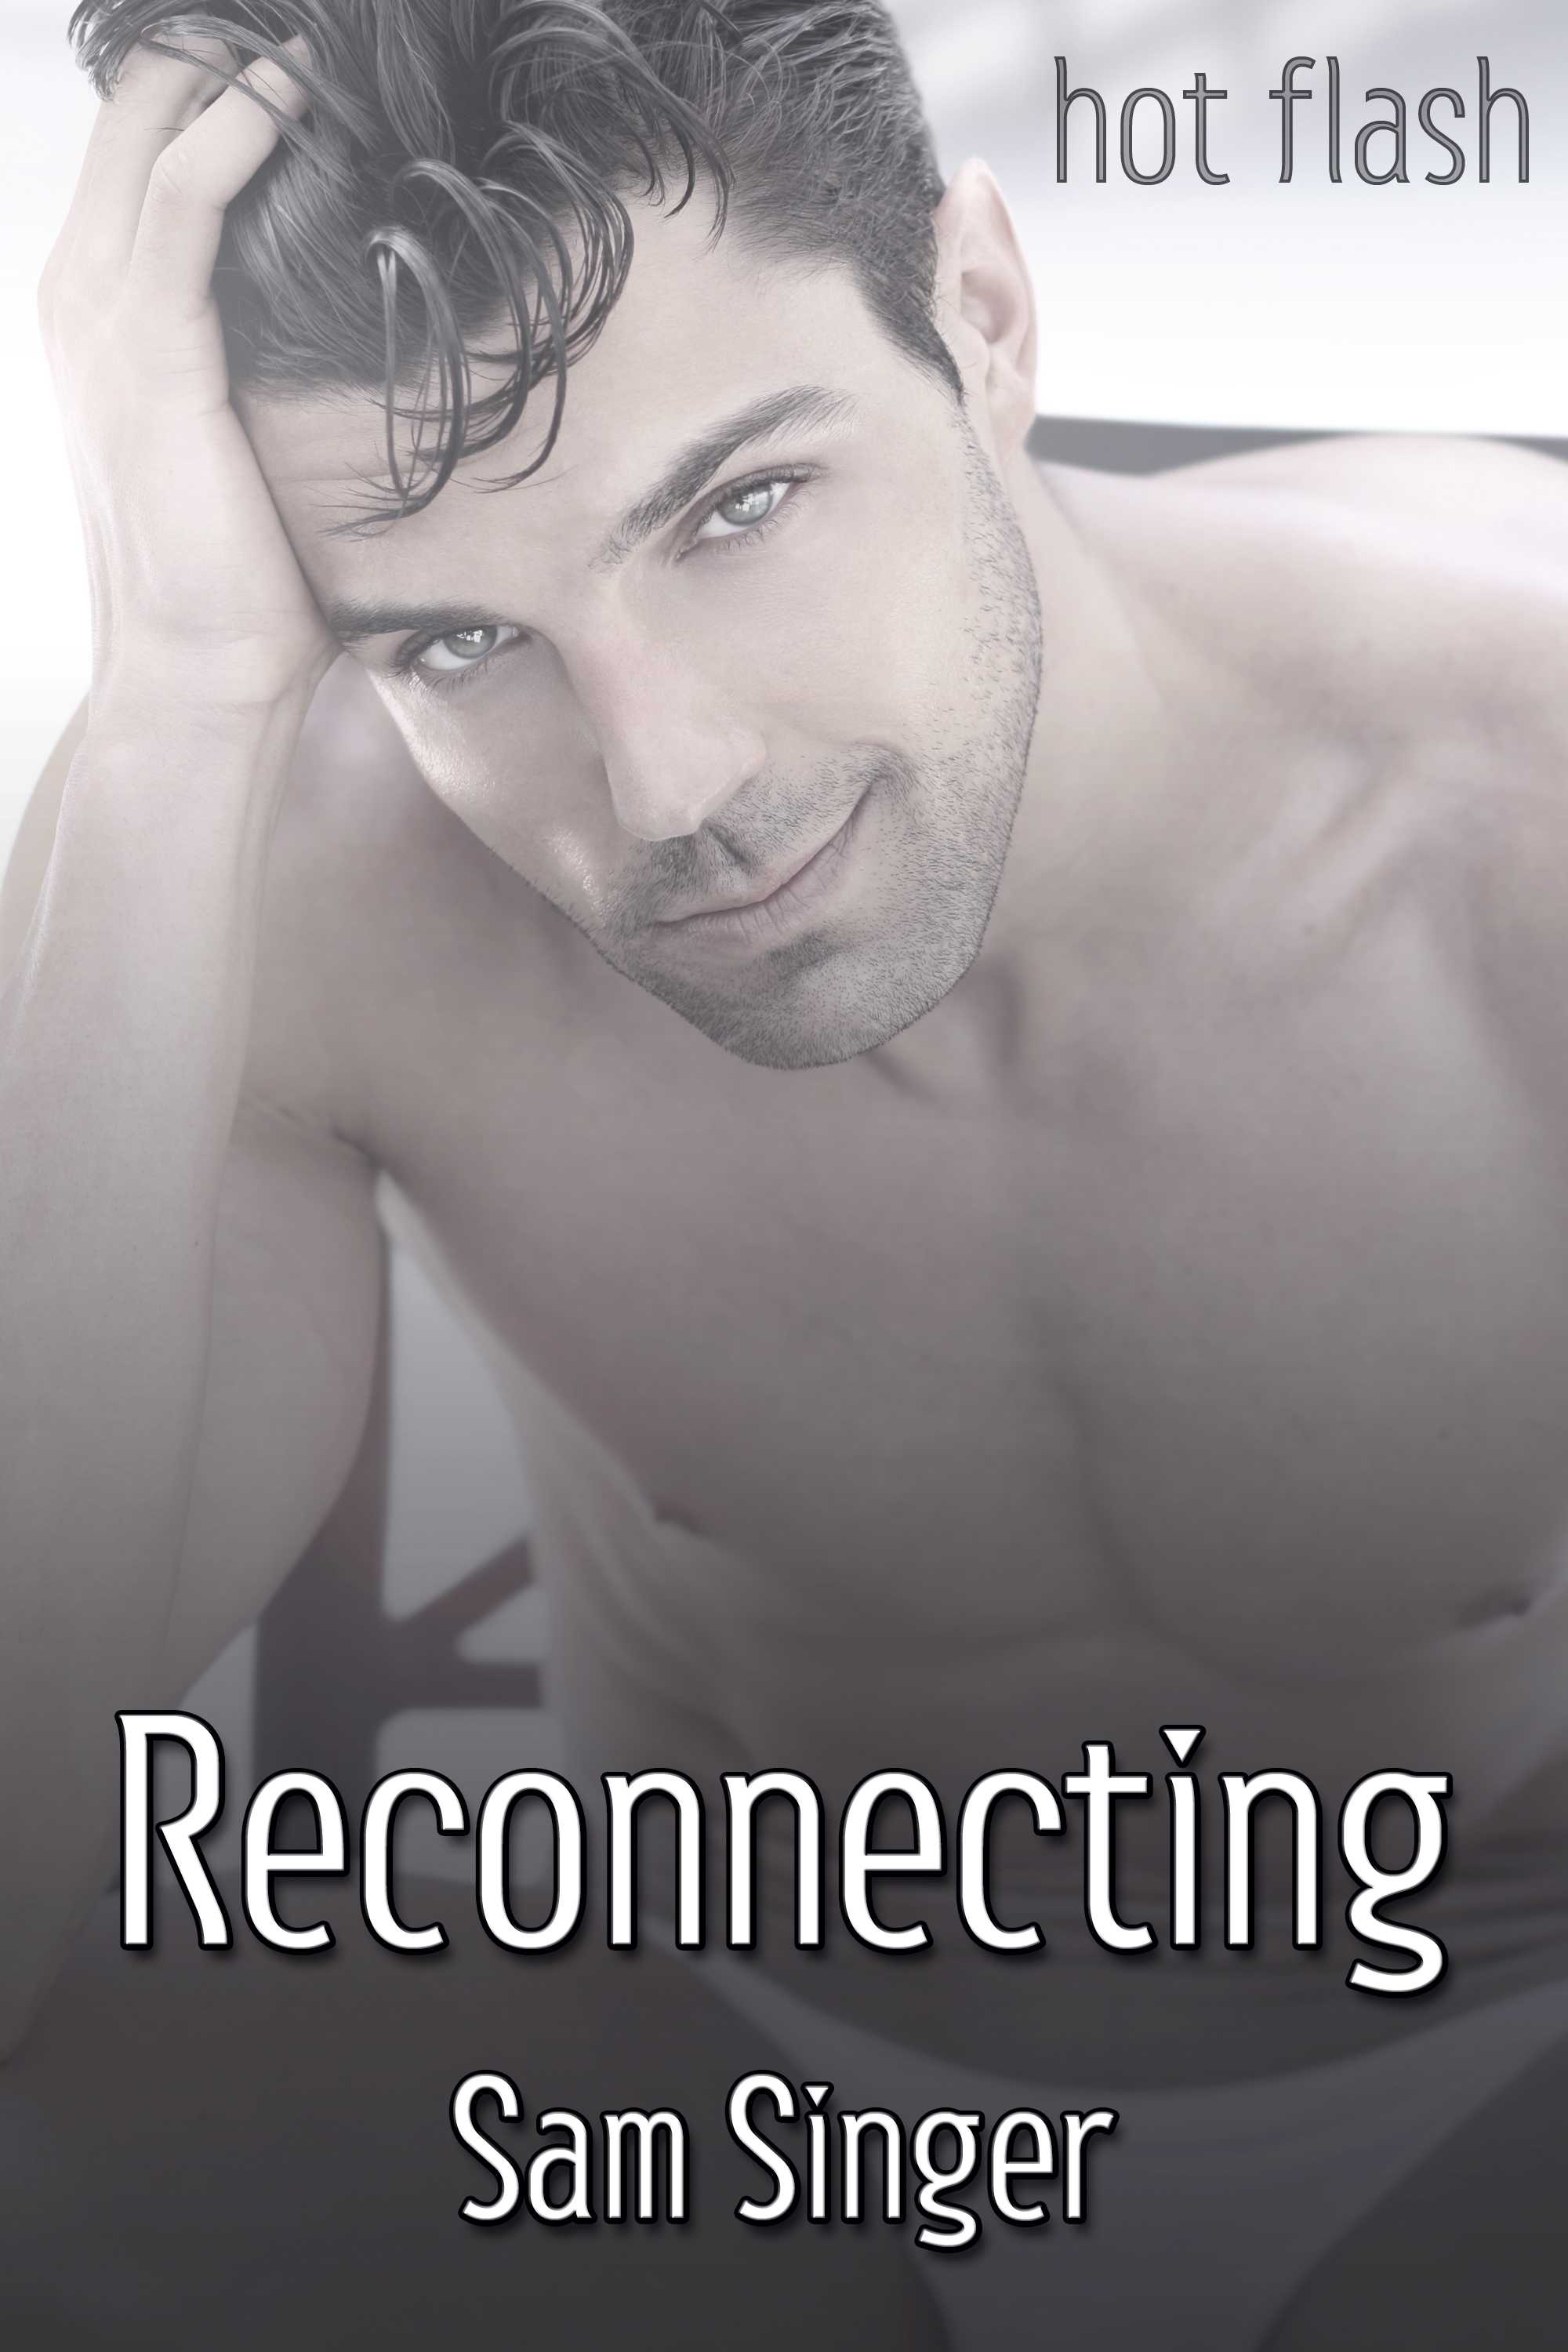 This image is the cover for the book Reconnecting